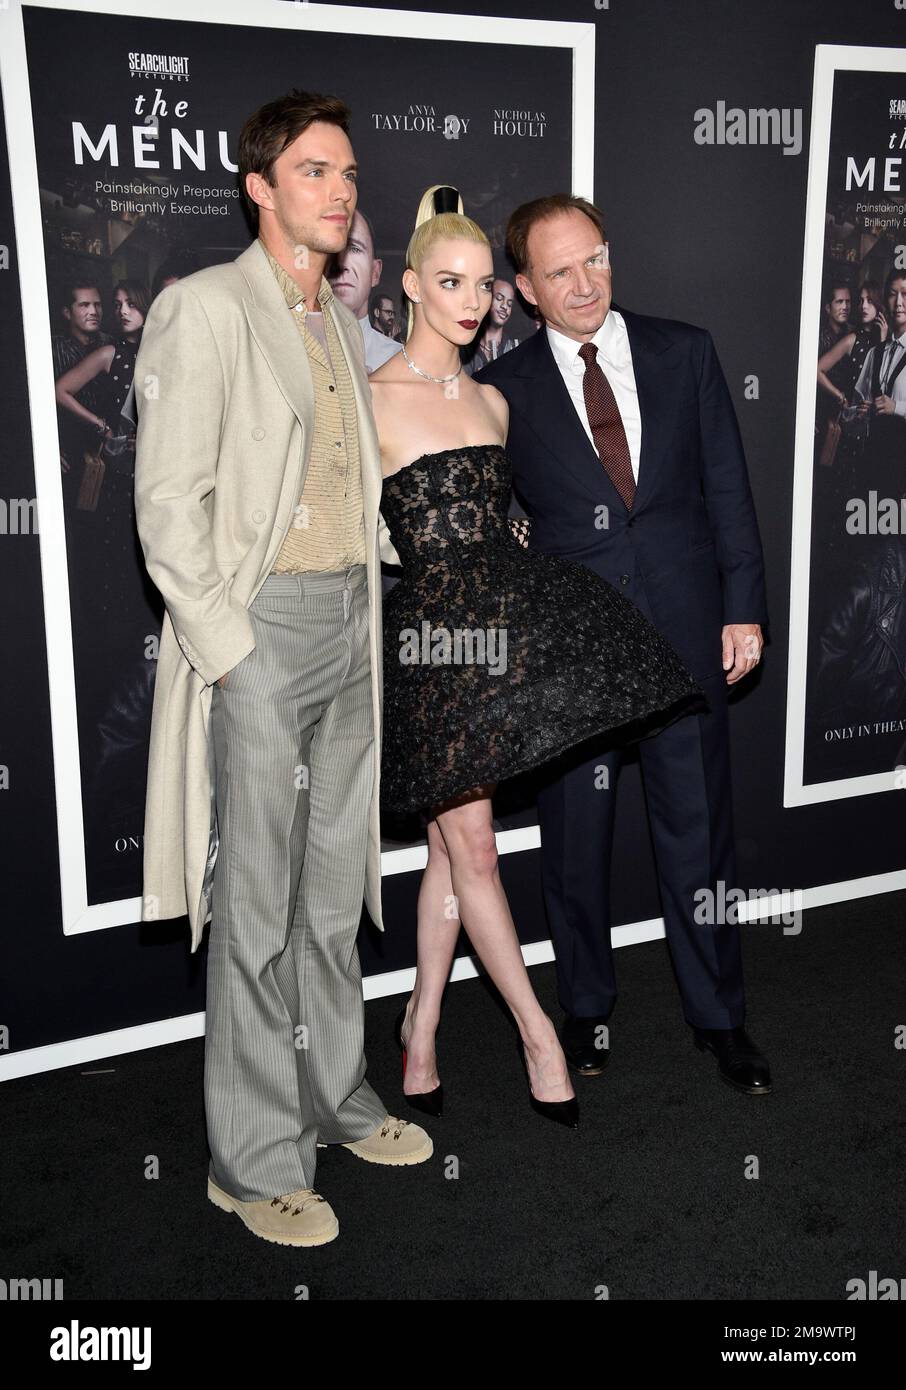 https://c8.alamy.com/comp/2M9WTPJ/nicholas-hoult-left-anya-taylor-joy-and-ralph-fiennes-attend-the-premiere-of-the-menu-at-amc-lincoln-square-on-monday-nov-14-2022-in-new-york-photo-by-evan-agostiniinvisionap-2M9WTPJ.jpg